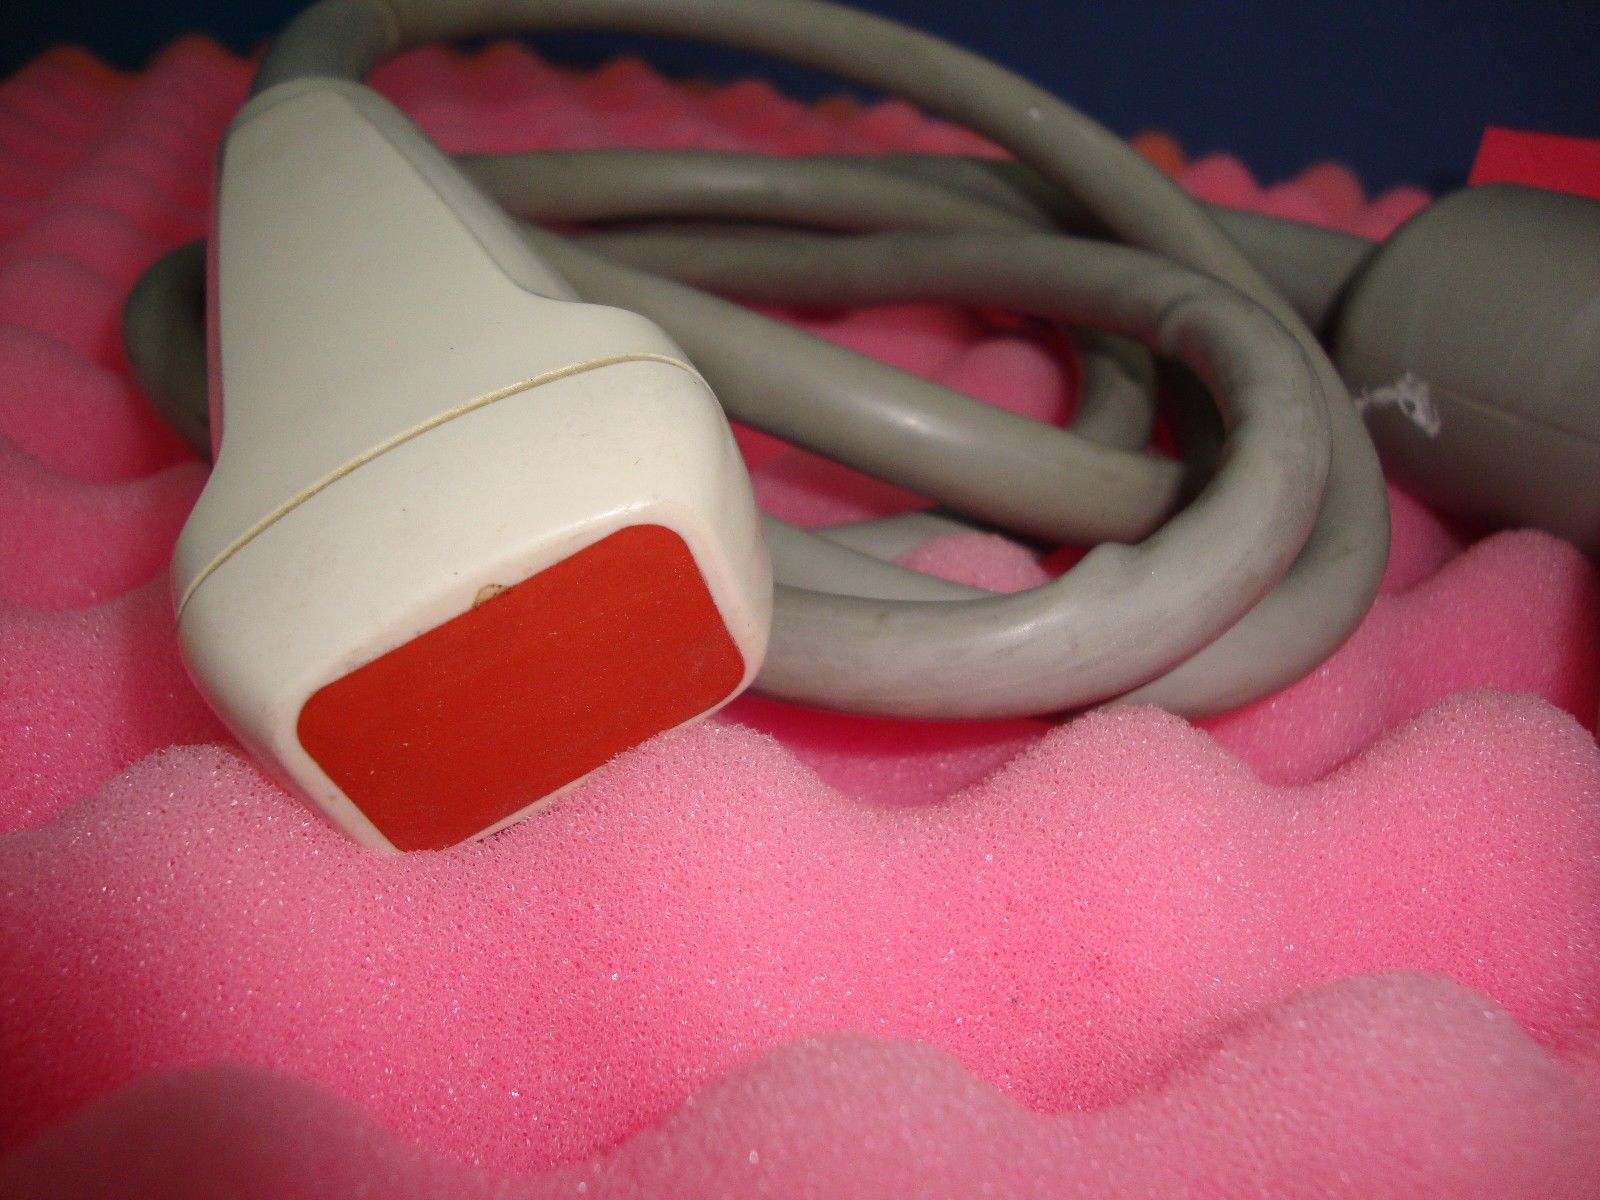 a close up of a probe head r on a pink surface